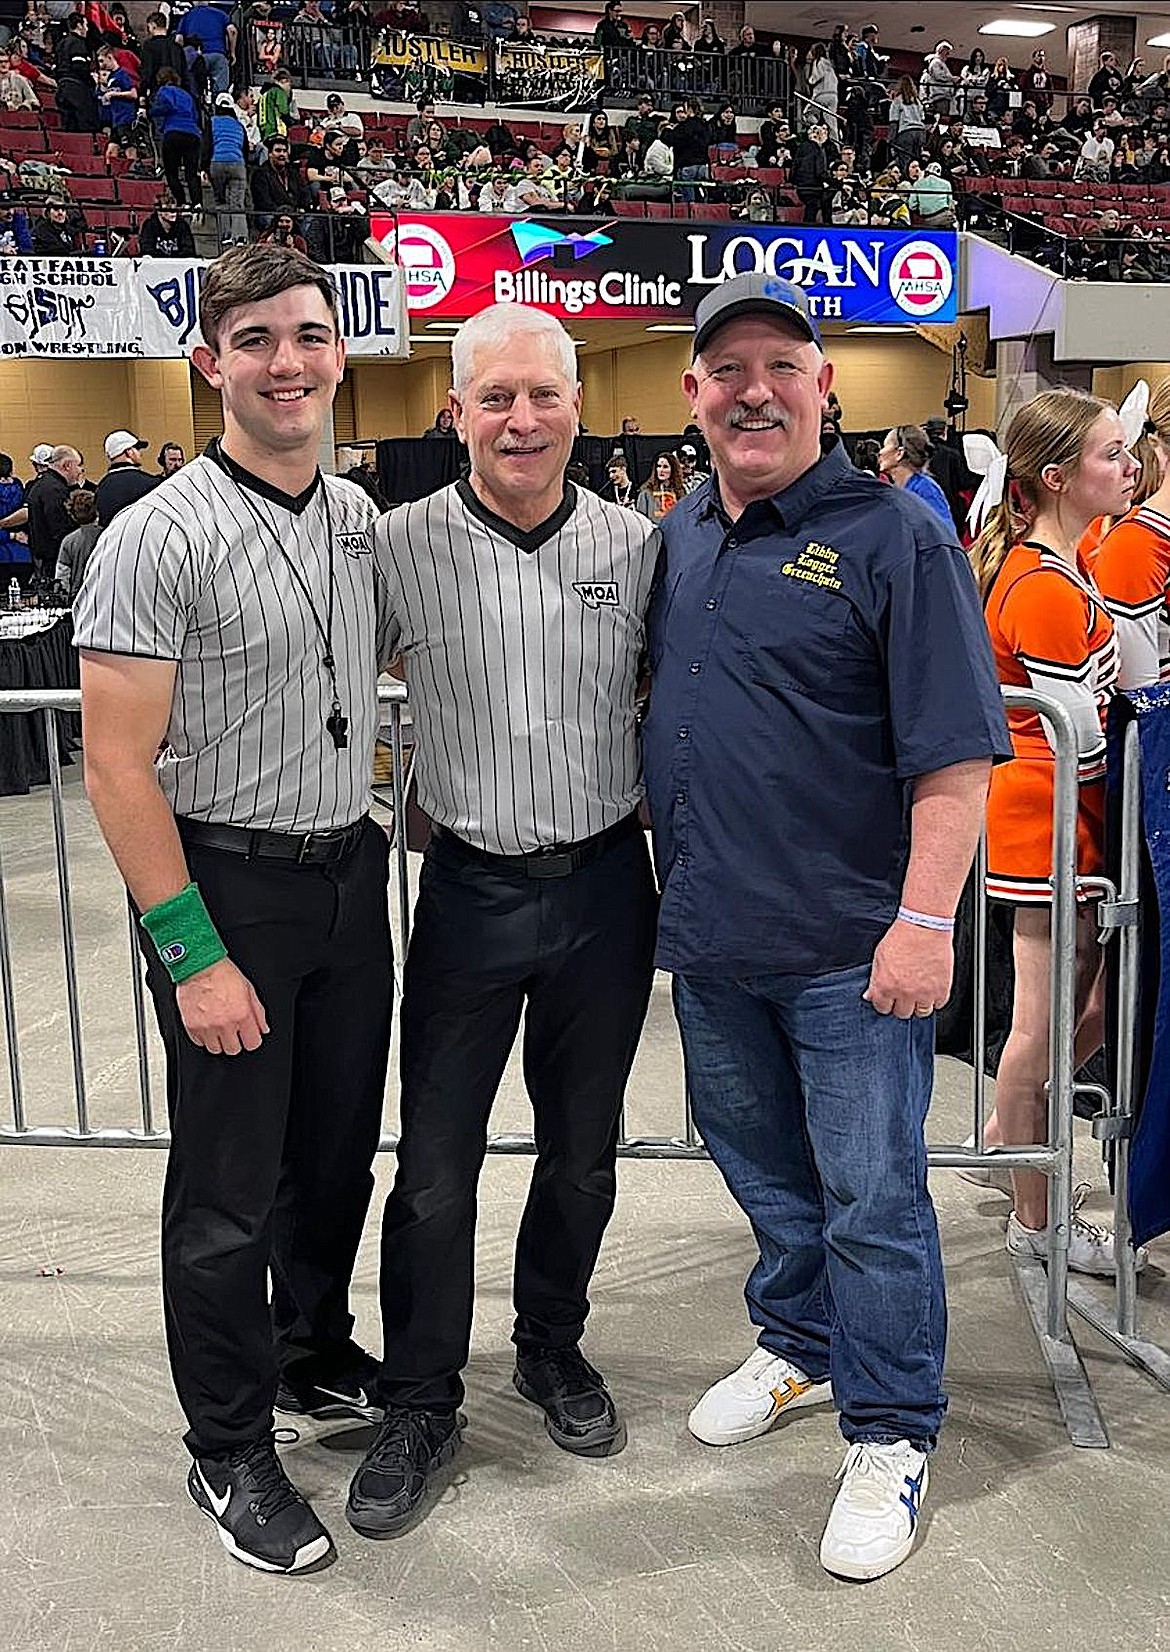 Libby Greenchain members Trey Thompson, Kurt Spencer and Dean Thompson gathered for a photo last weekend at the Montana High School Association Class A wrestling championships in Billings. Thompson was wrestling his first state tournament while Spencer officiated his last. Thompson, the current Libby coach, is also a long-time official. (Photo courtesy Greenchain Wrestling Club)